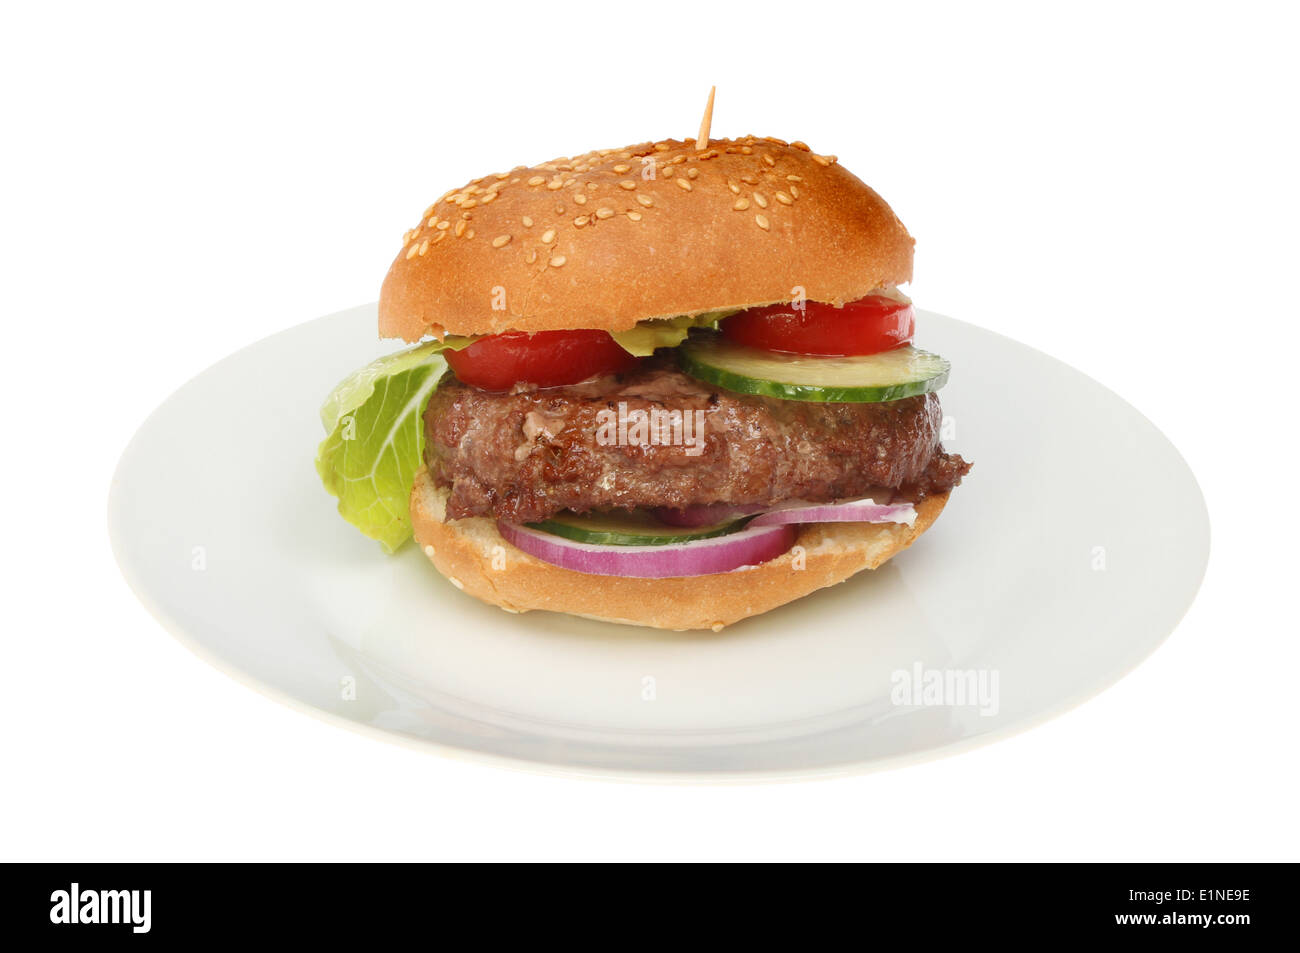 Beef burger in a bun on a plate isolated against white Stock Photo